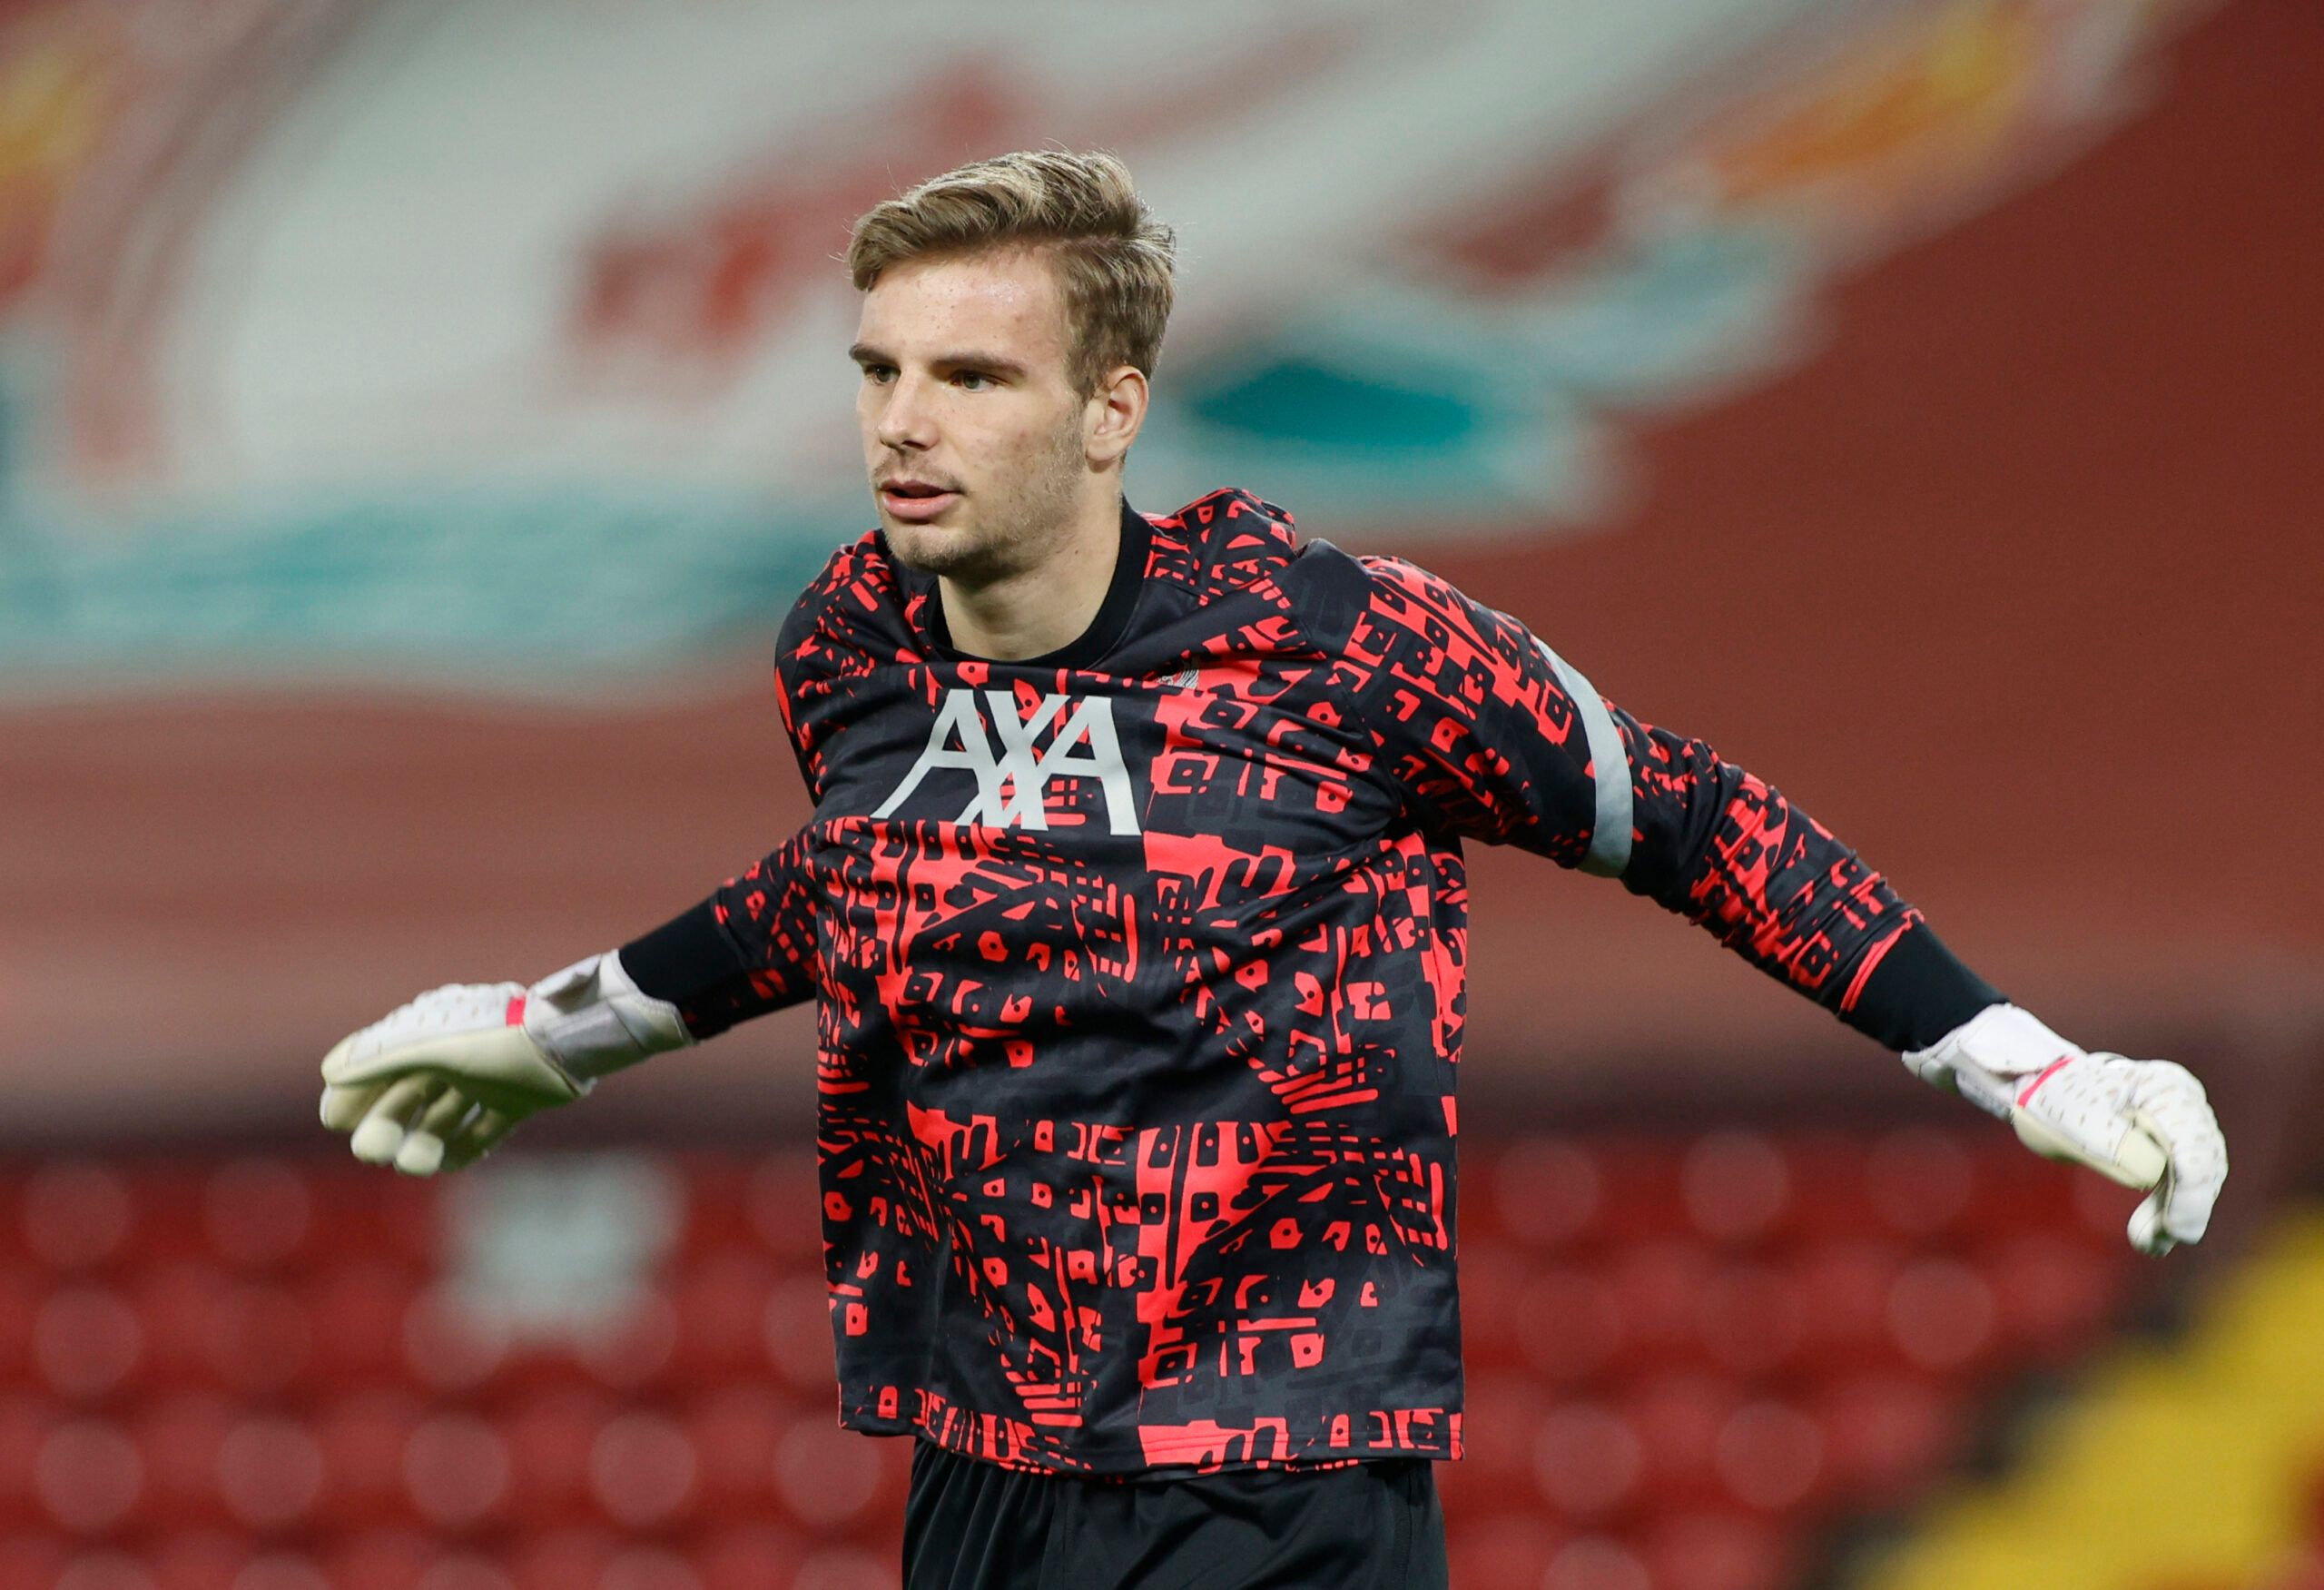 Soccer Football - Champions League - Group D - Liverpool v Ajax Amsterdam - Anfield, Liverpool, Britain - December 1, 2020  Liverpool's Vitezslav Jaros during the warm up before the match Pool via REUTERS/Phil Noble